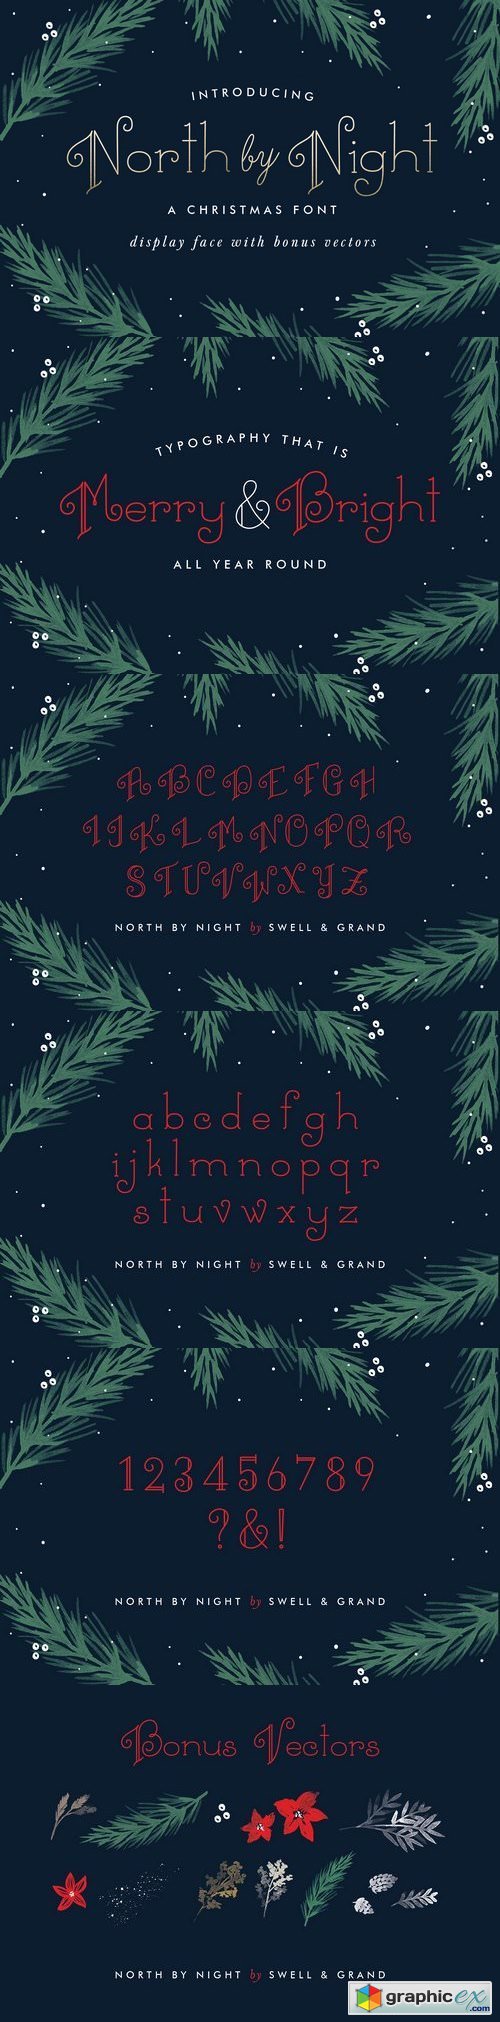 North by Night, A Christmas Font